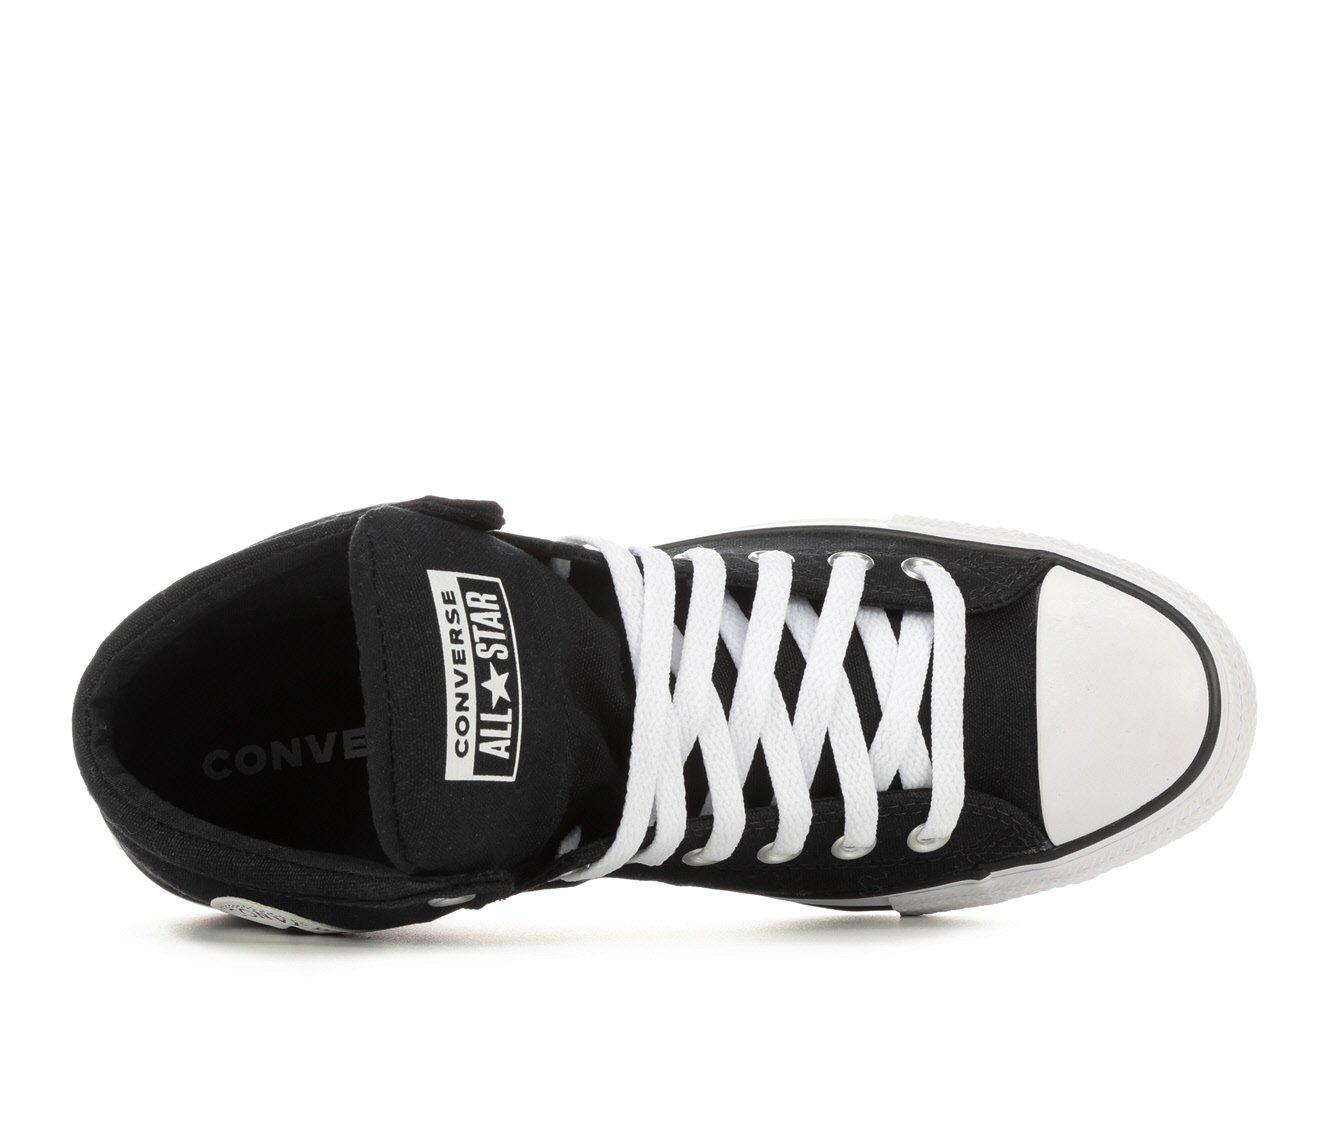 Adults' Converse Chuck Taylor All Star Foundation Hi Sneakers | Shoe ...